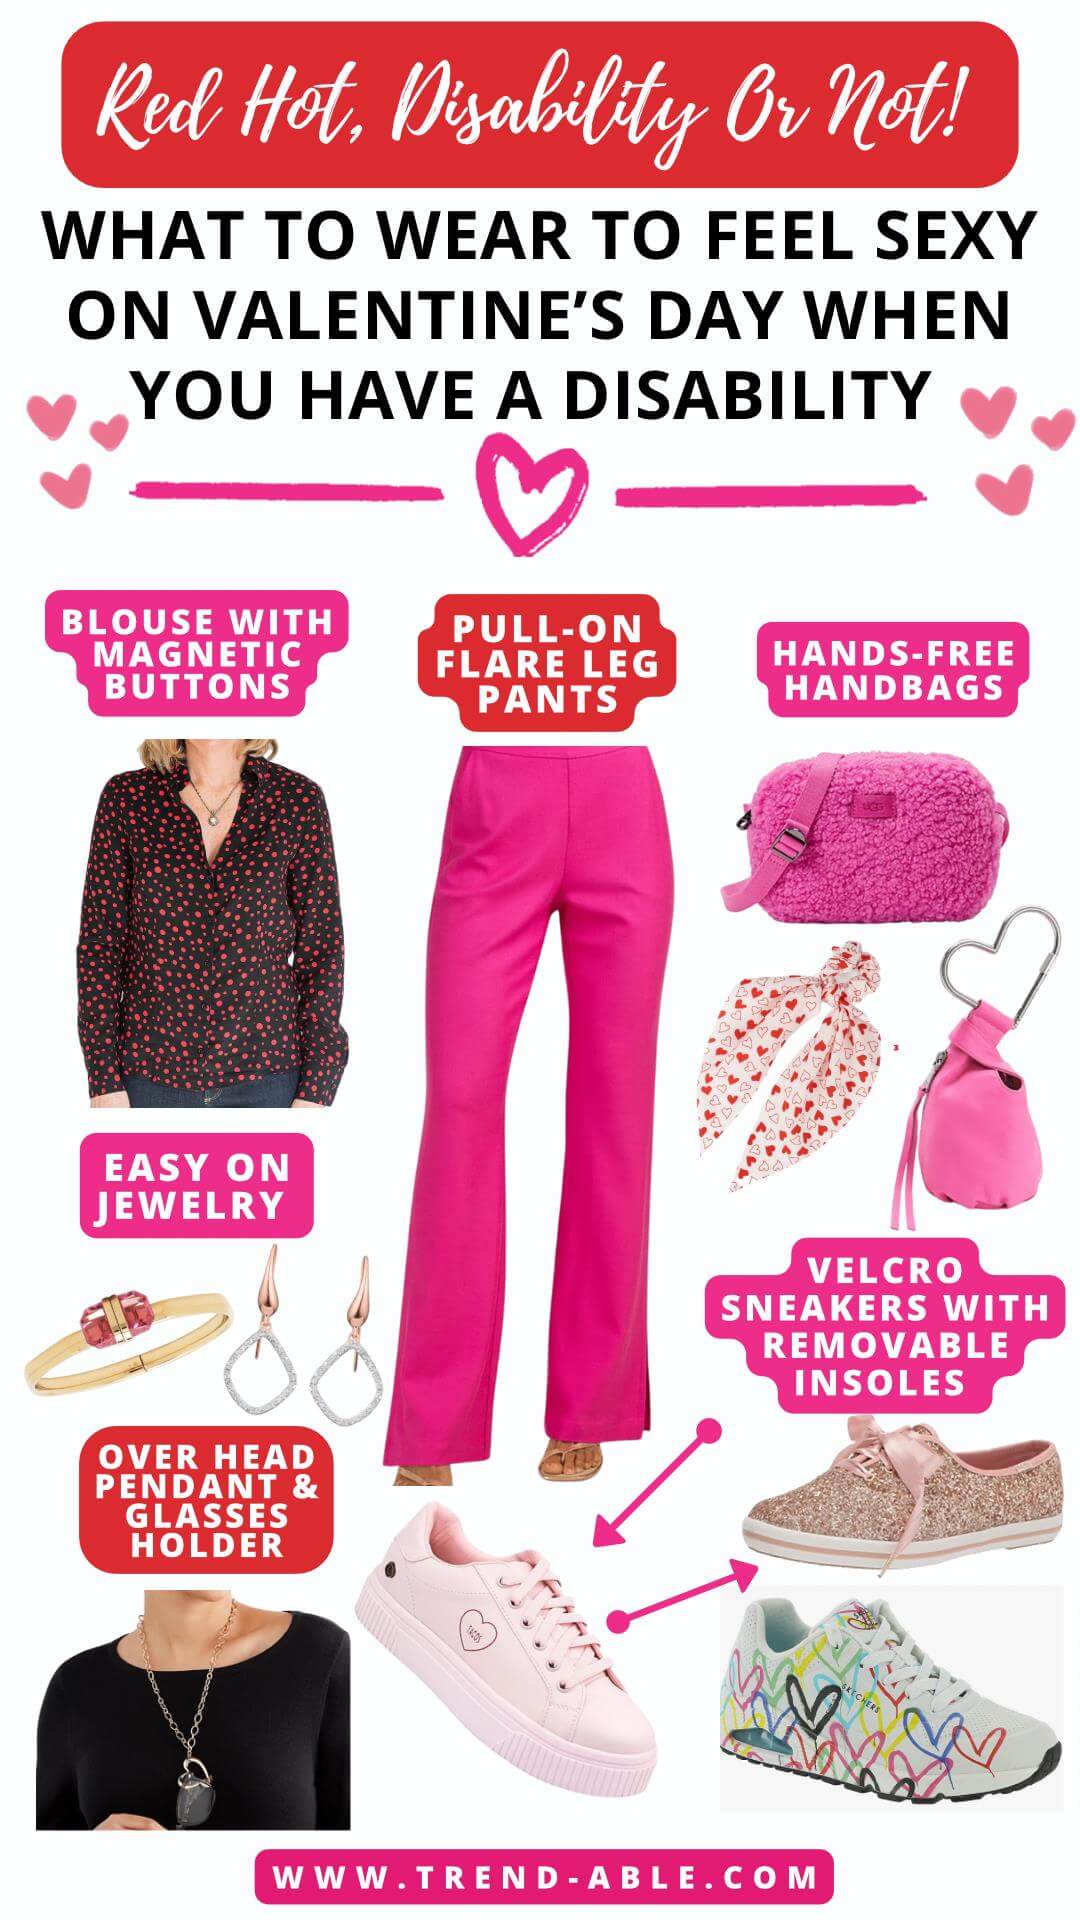 Tips & Adaptive Fashion For Looking & Feeling Sexy With A Disability On Valentine’s Day